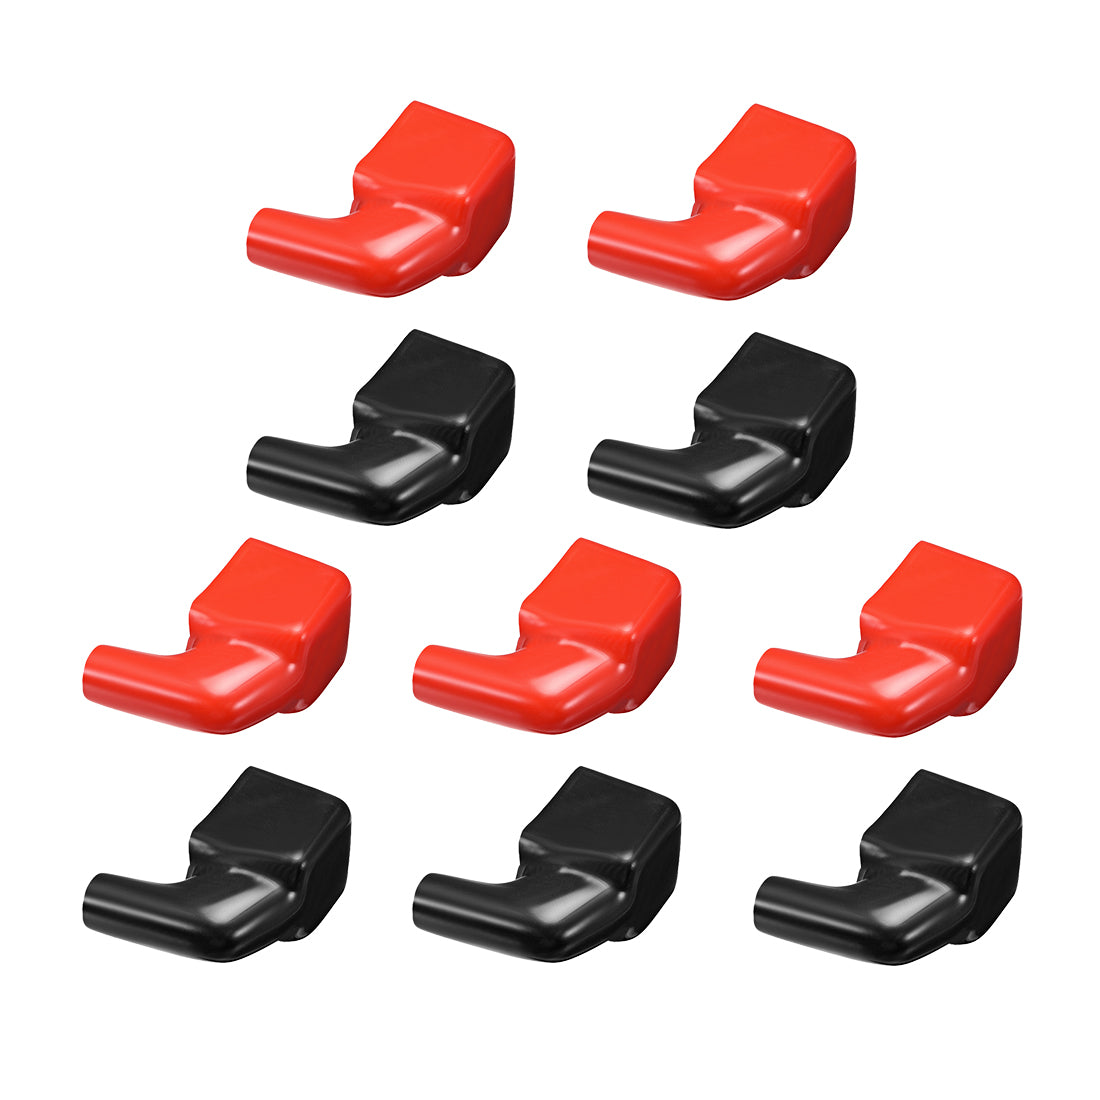 uxcell Uxcell Battery Terminal Insulating Rubber Protector Covers for 8mm Cable 15mm Terminal Red Black 5 Pairs